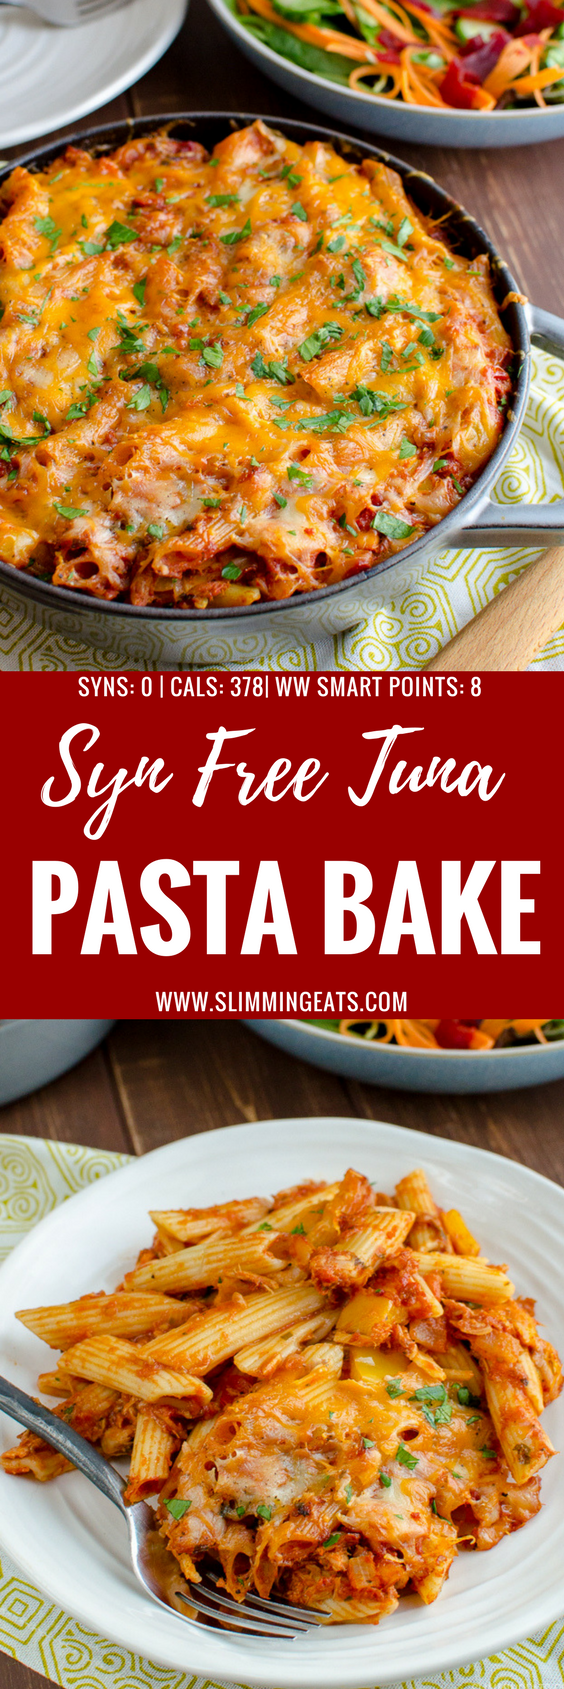 Delicious Syn Free Tuna Pasta Bake - a perfect meal any day of the week for the whole family, using simple easy ingredients. Slimming World and Weight Watchers friendly